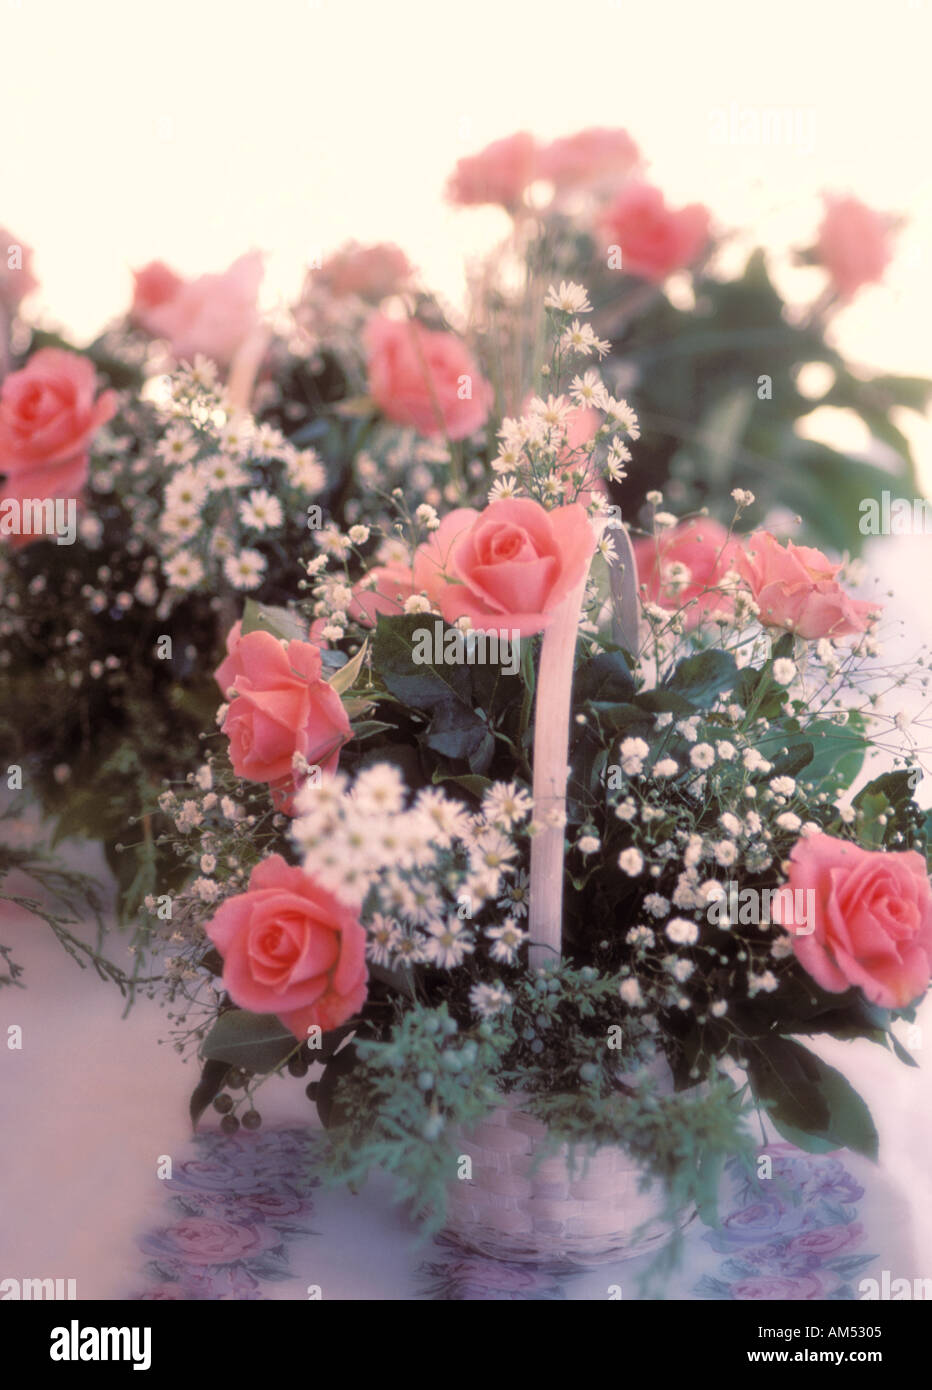 Pink Babys Breath With Pink Background Stock Photo - Download Image Now -  Blossom, Branch - Plant Part, Celebration - iStock